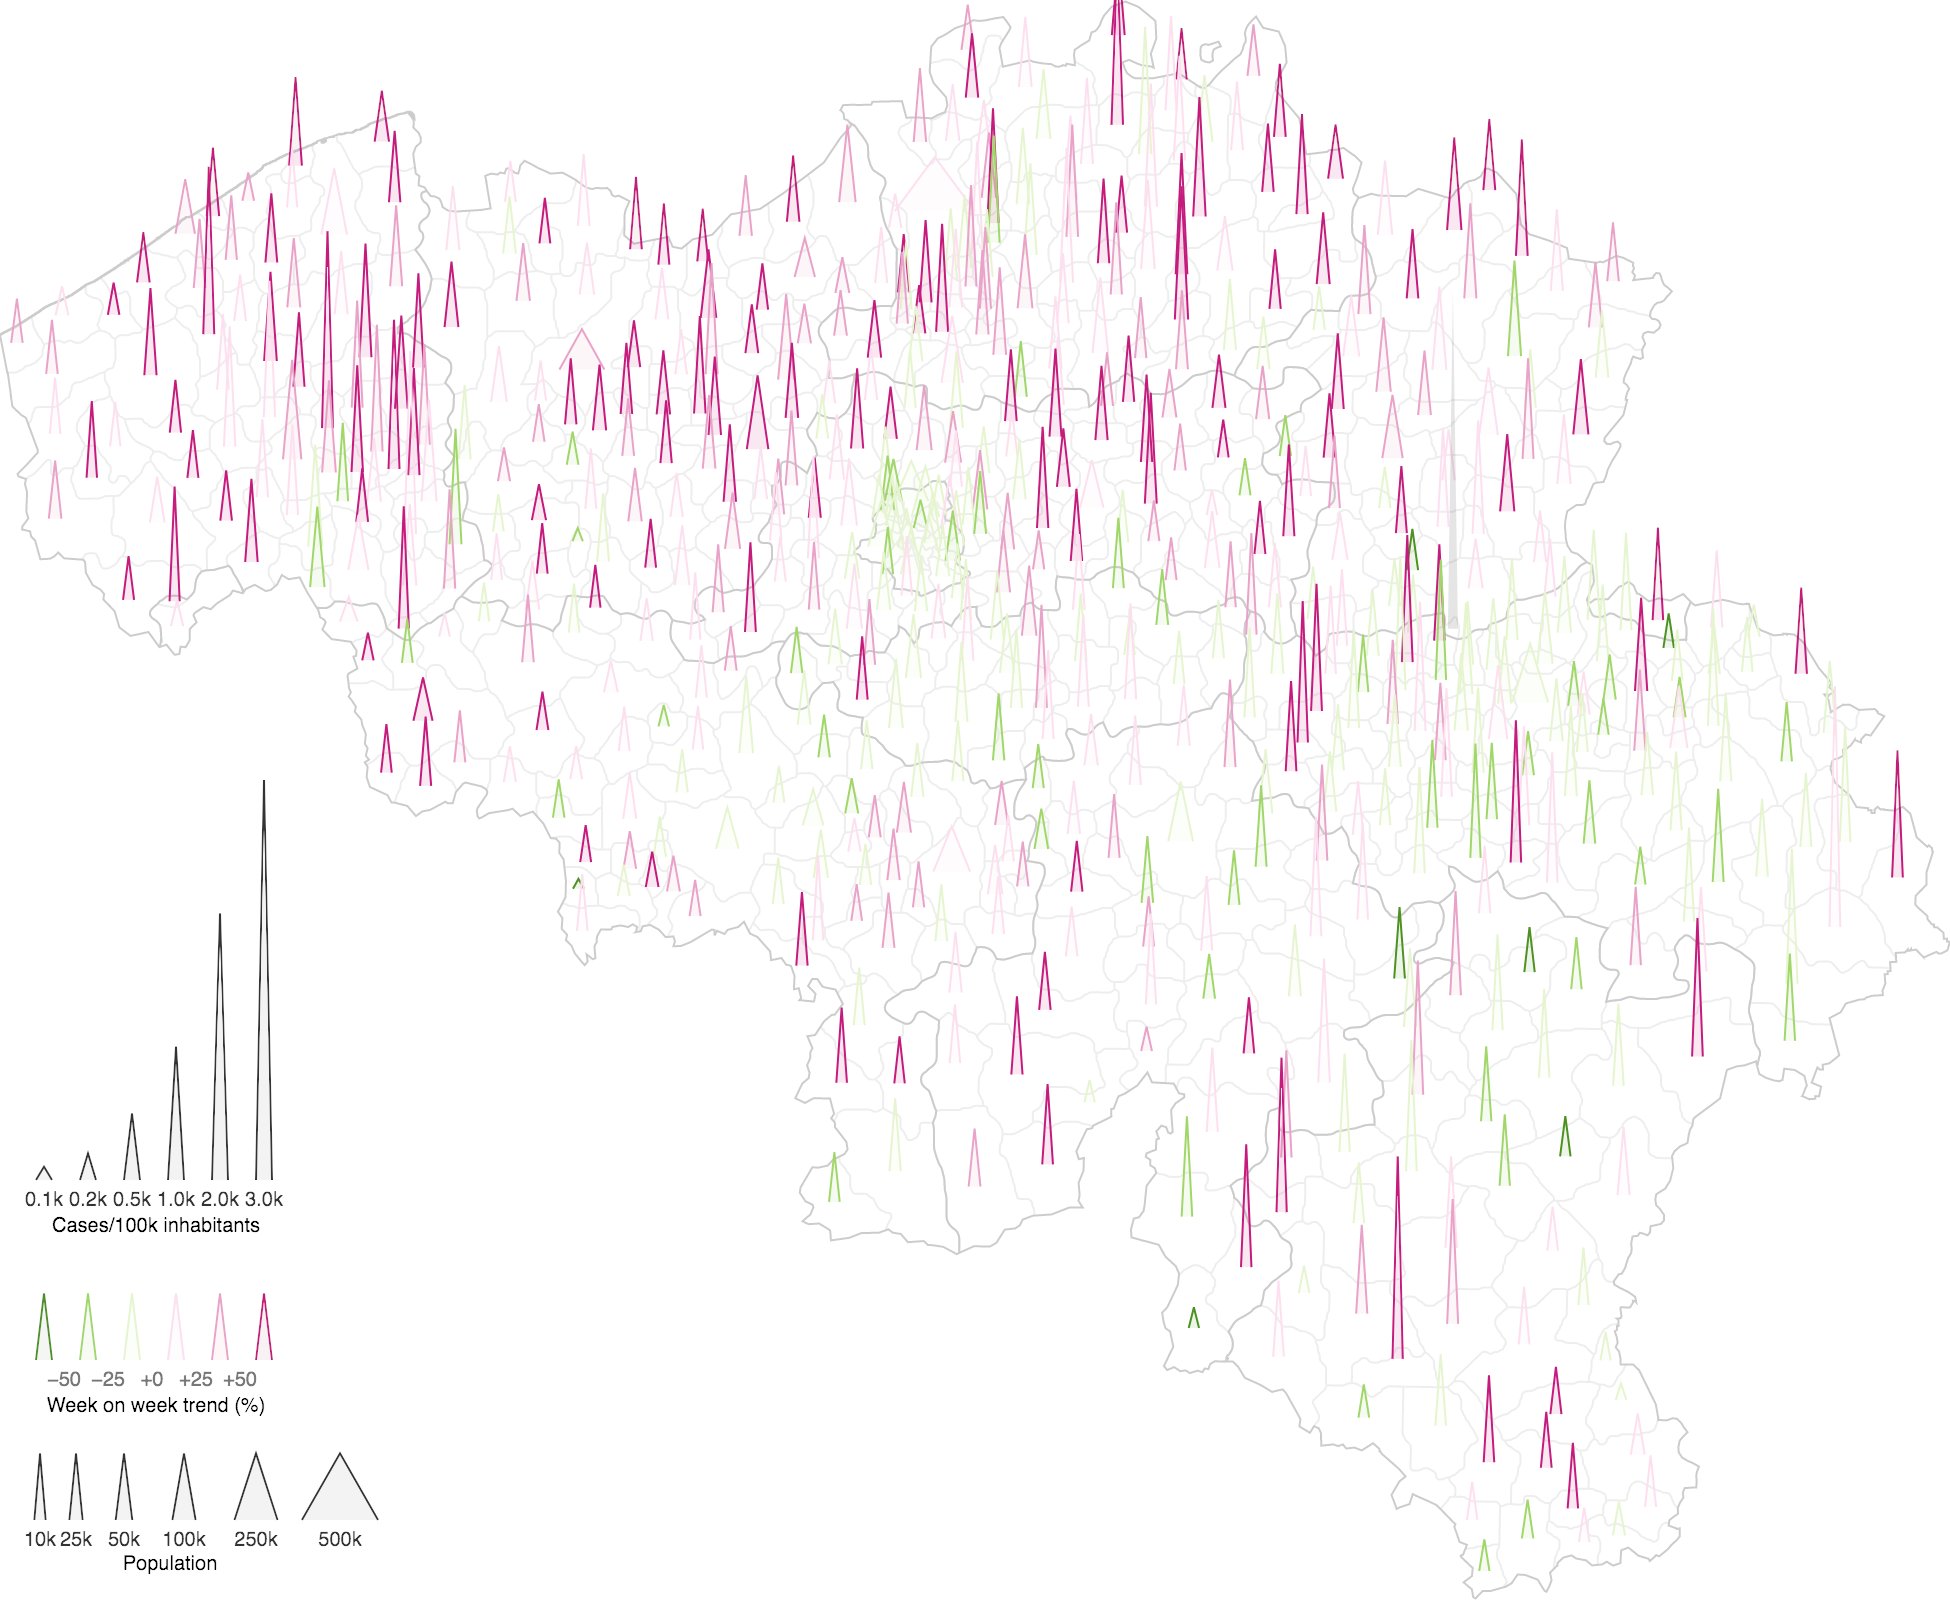 Spike map of Belgian municipalities, with the height of the spikes proportional to the number of Covid-19 cases per 100.000 inhabitants, their widht proportional to the population and the colour representing the trend in cases